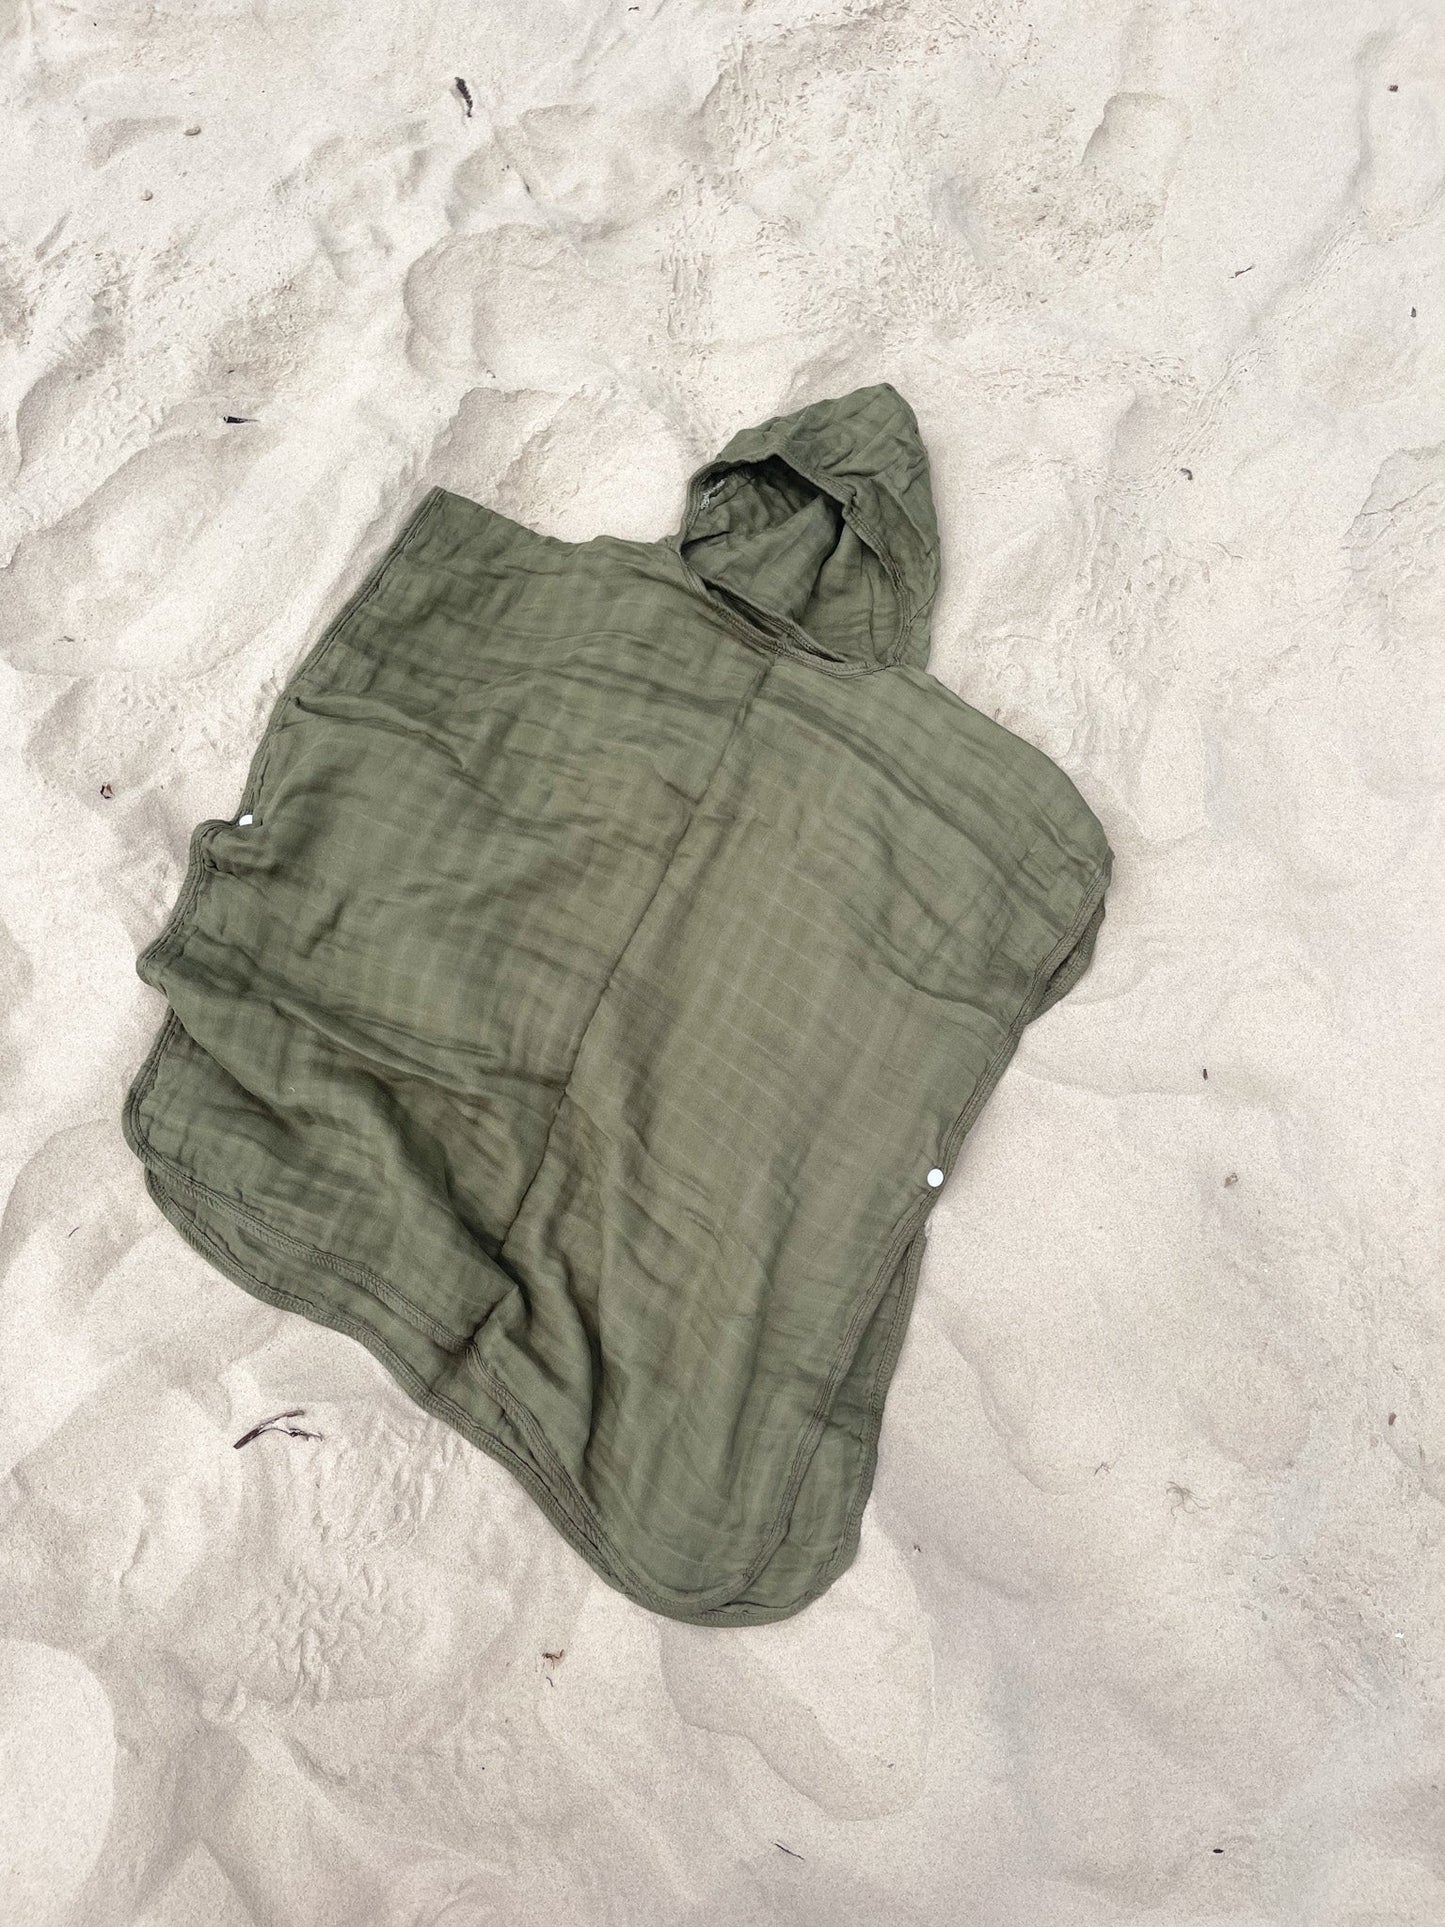 Organic Hooded Poncho Towel - Olive - Little Reef and Friends